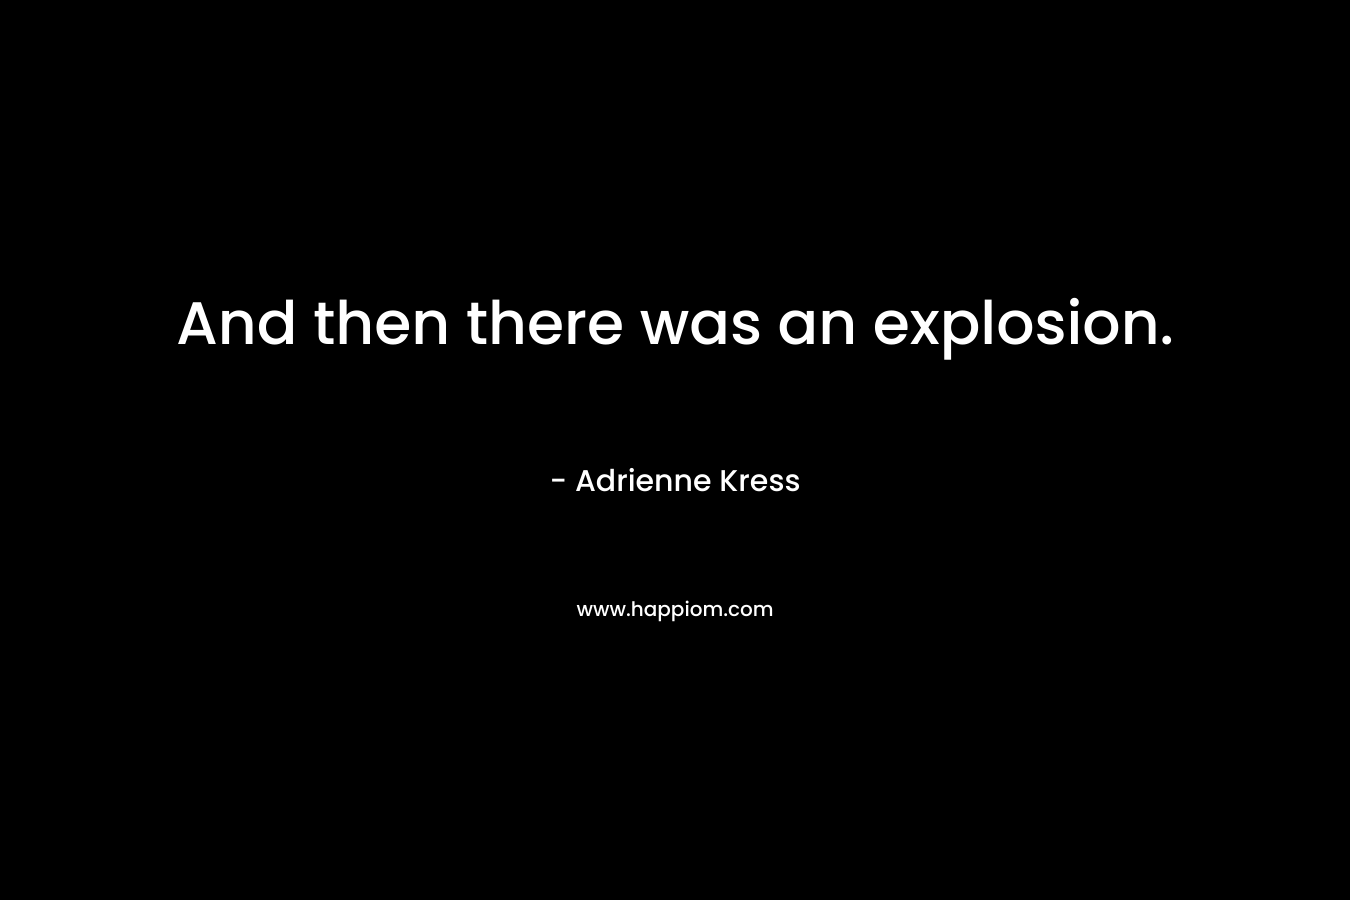 And then there was an explosion. – Adrienne Kress